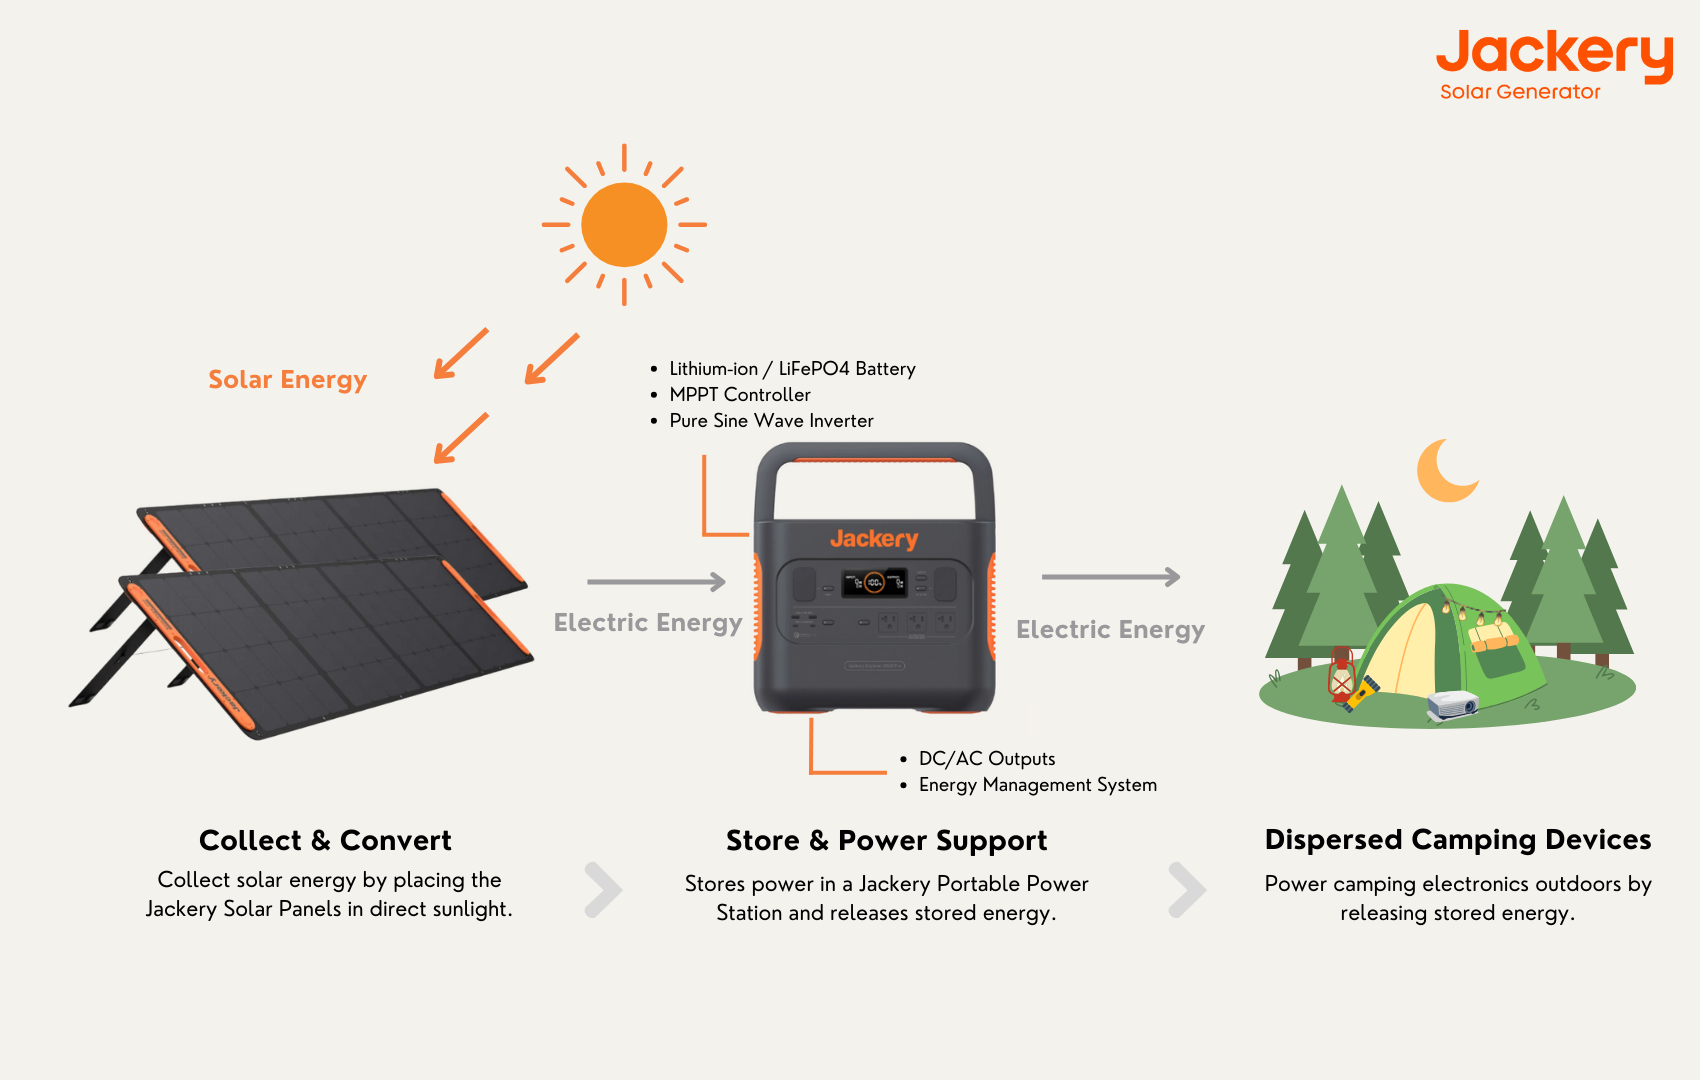 how Jackery solar generator works for dispersed camping